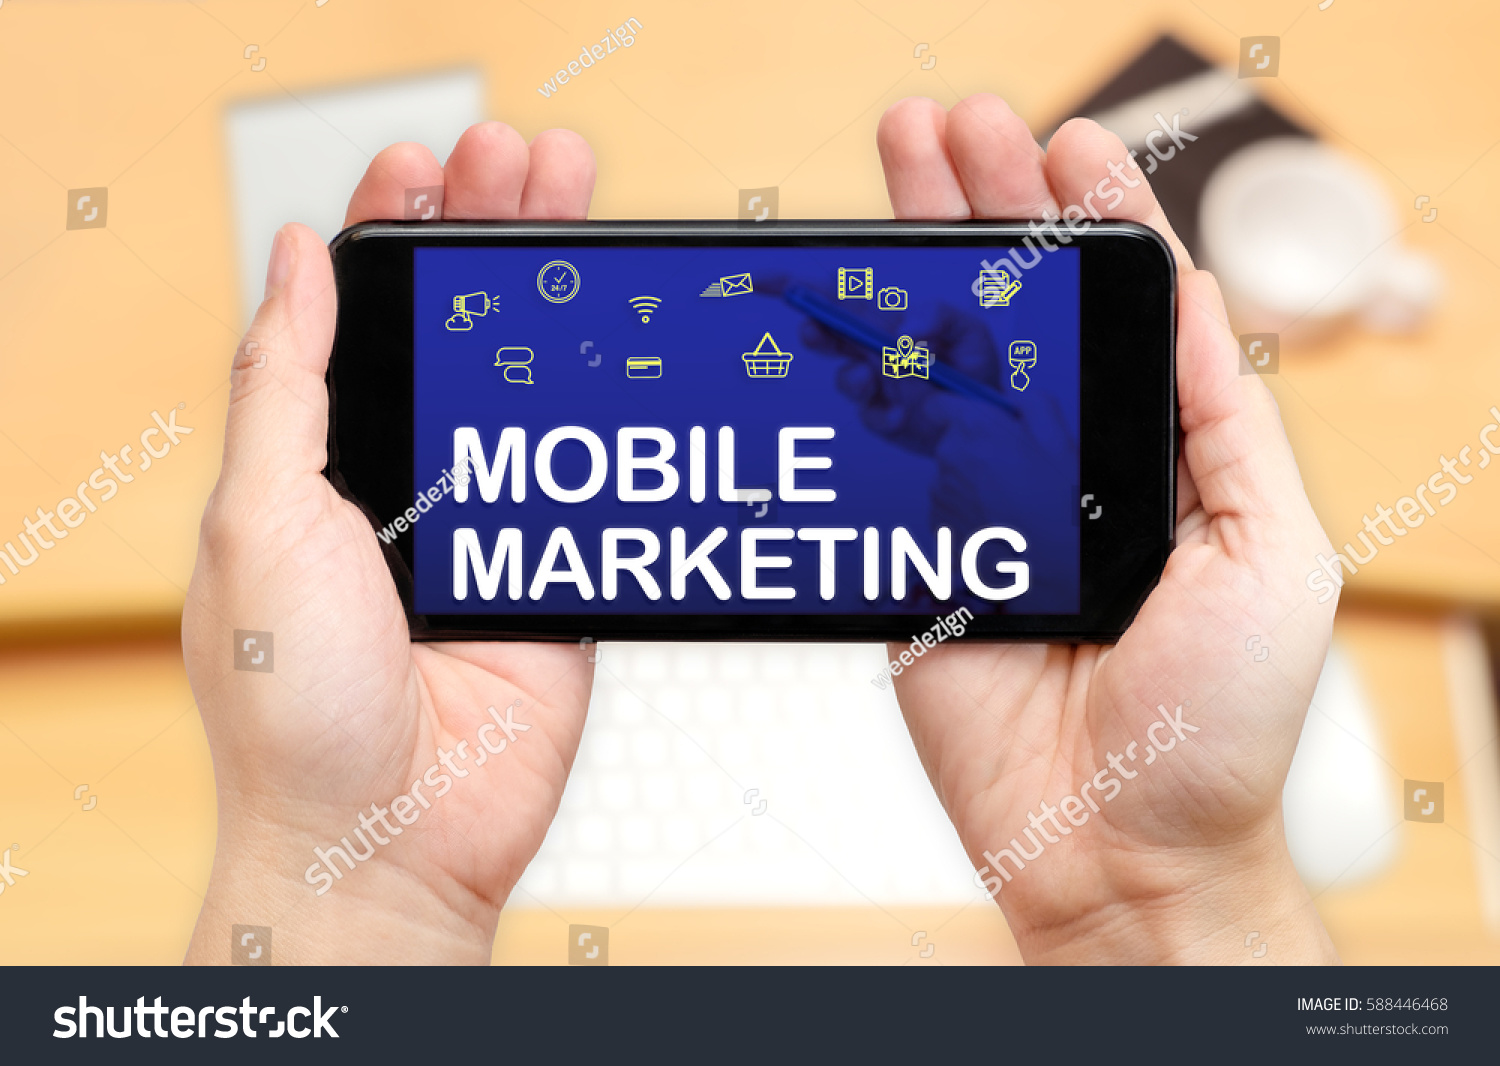 Watching two hand holding mobile phone with Mobile marketing word on screen and blur desk office background,Digital content concept #588446468